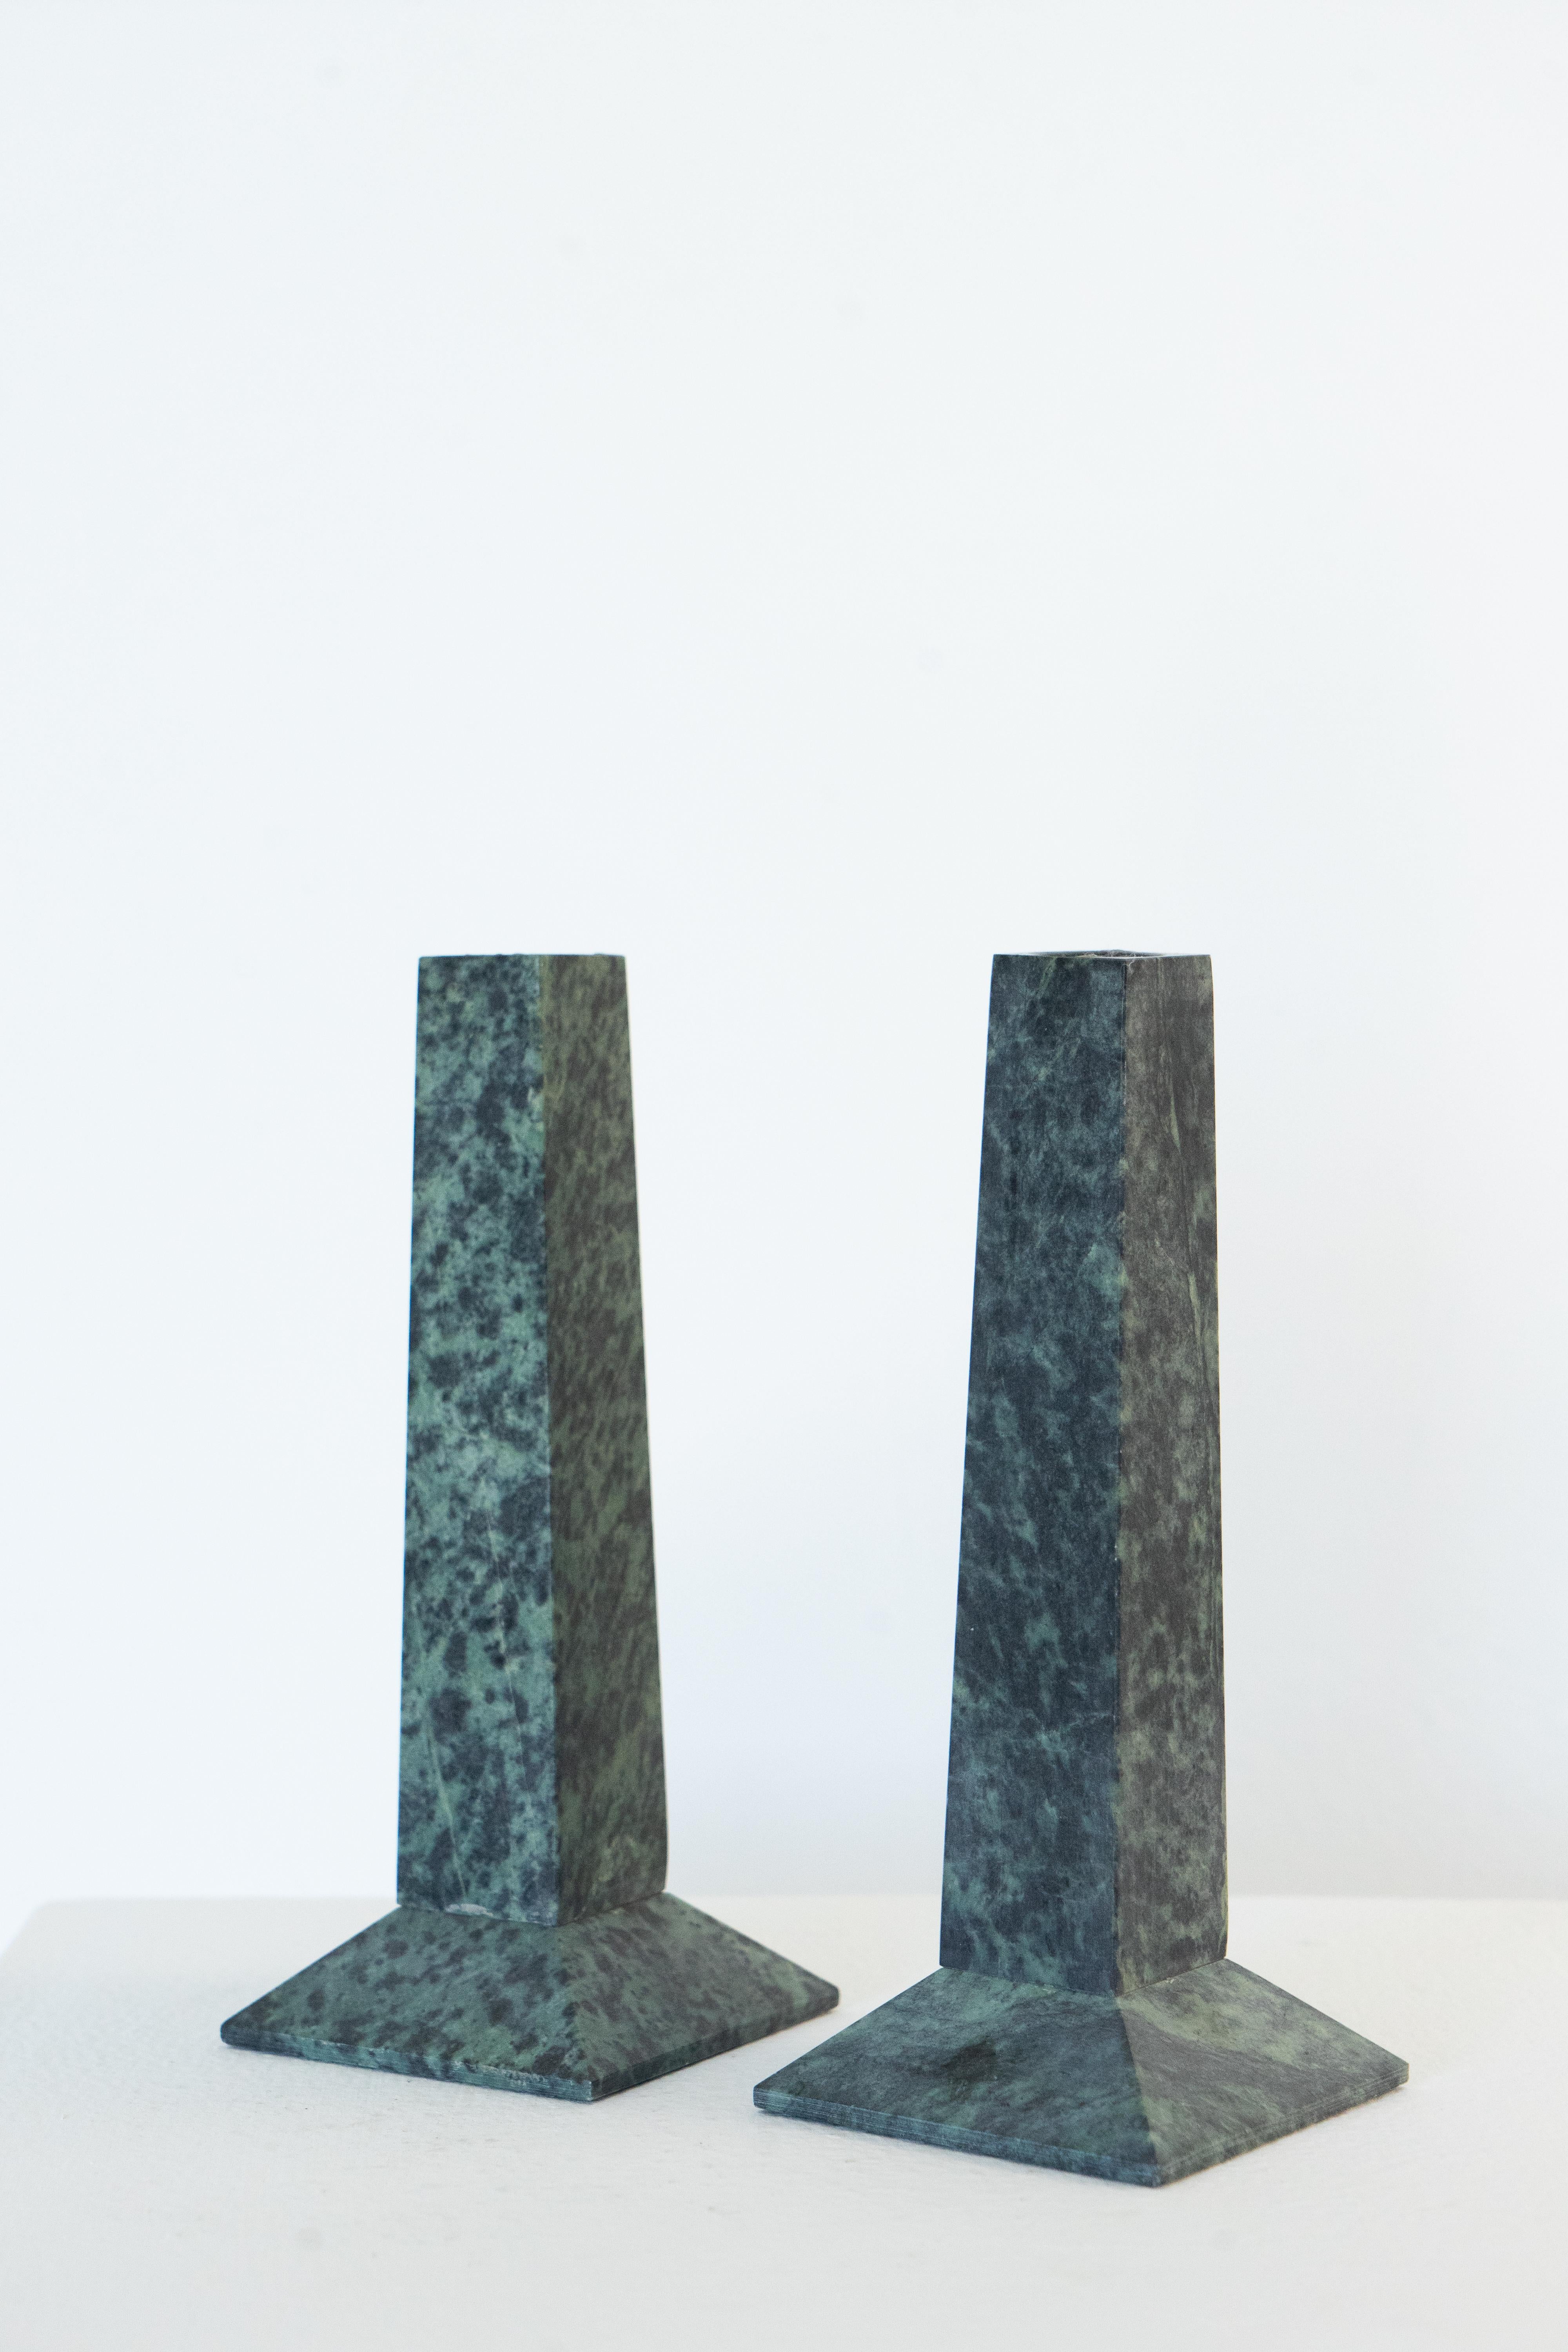 Post-Modern Italian Green Marble Architectural Candle Holders Circa 1980s For Sale